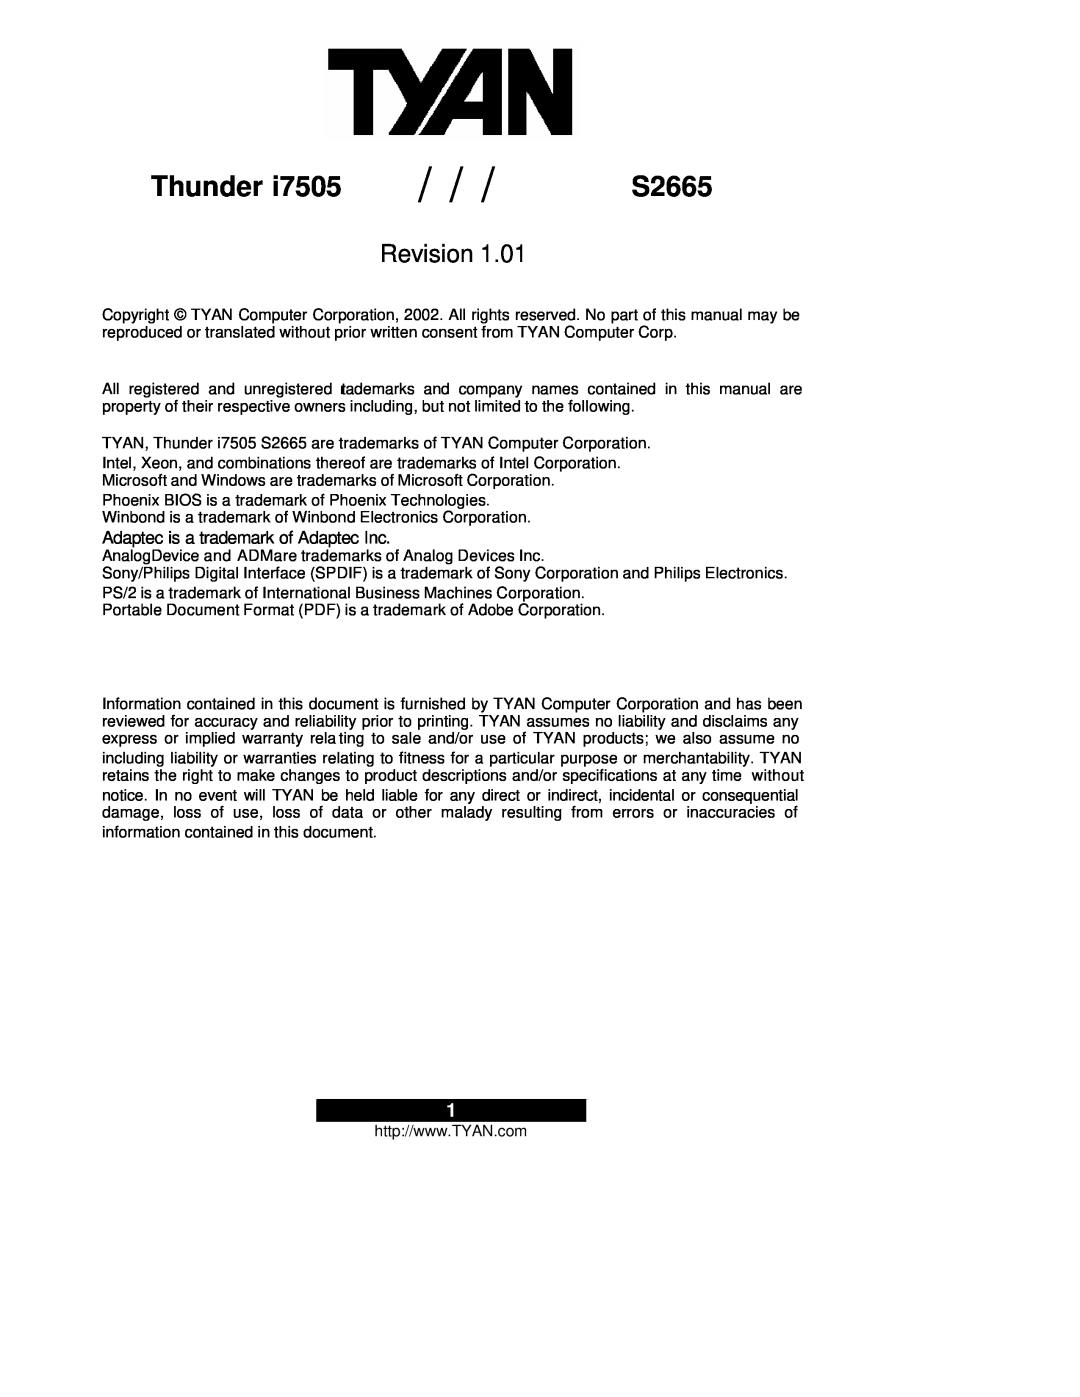 Tyan Computer Thunder i7505 warranty S2665, Revision, Adaptec is a trademark of Adaptec Inc 